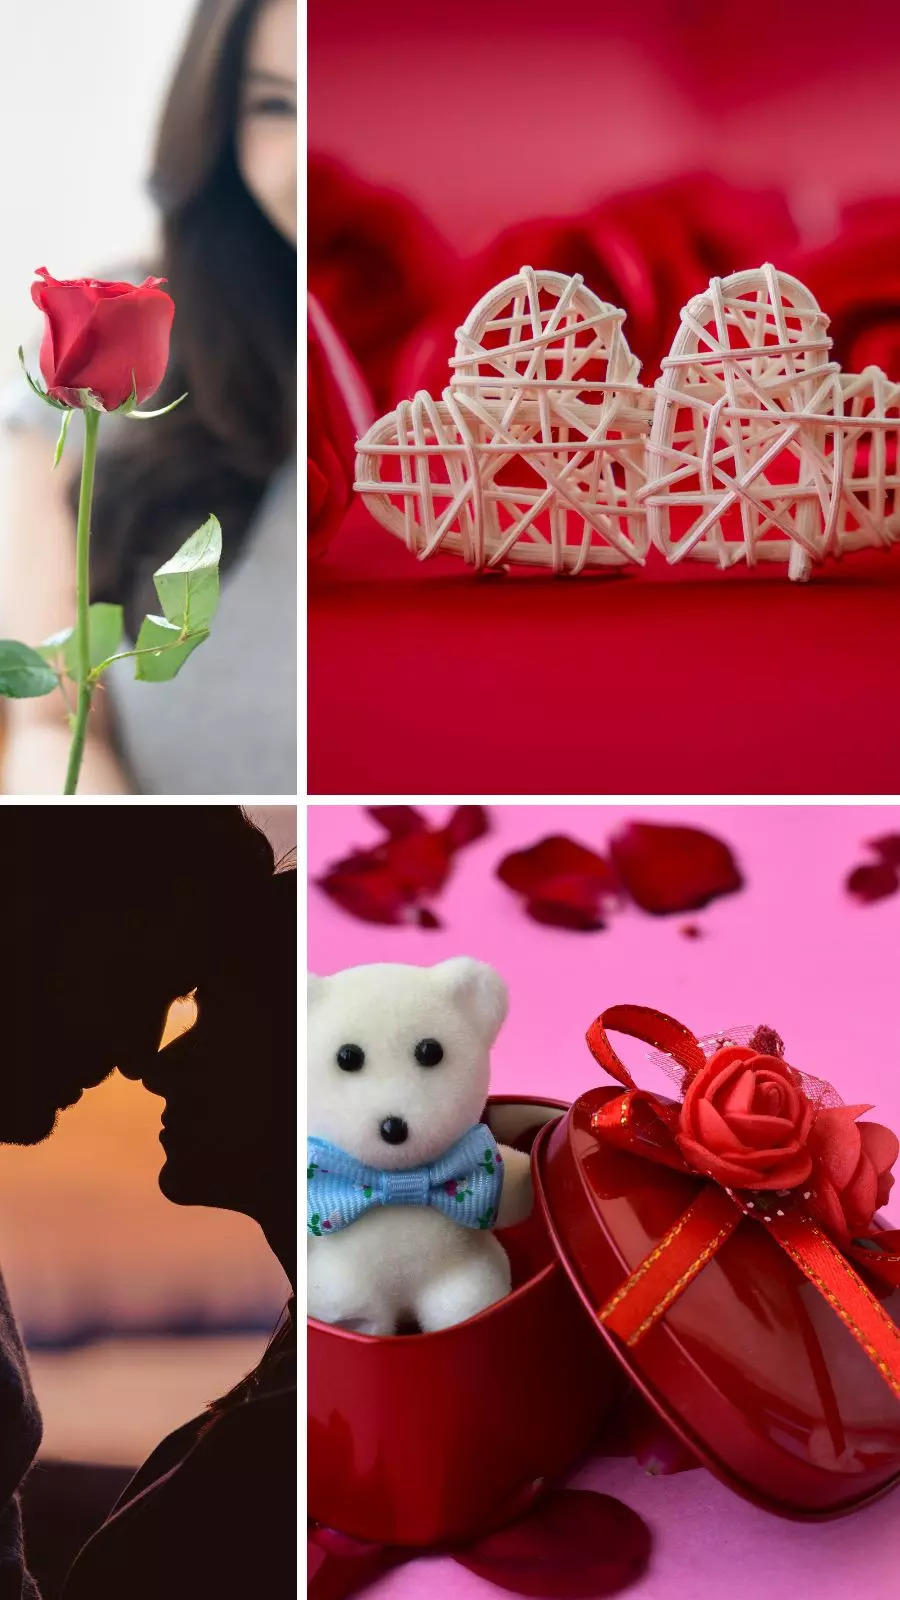 Valentine's Week Explained: When is Rose Day, Chocolate Day, Teddy Day?